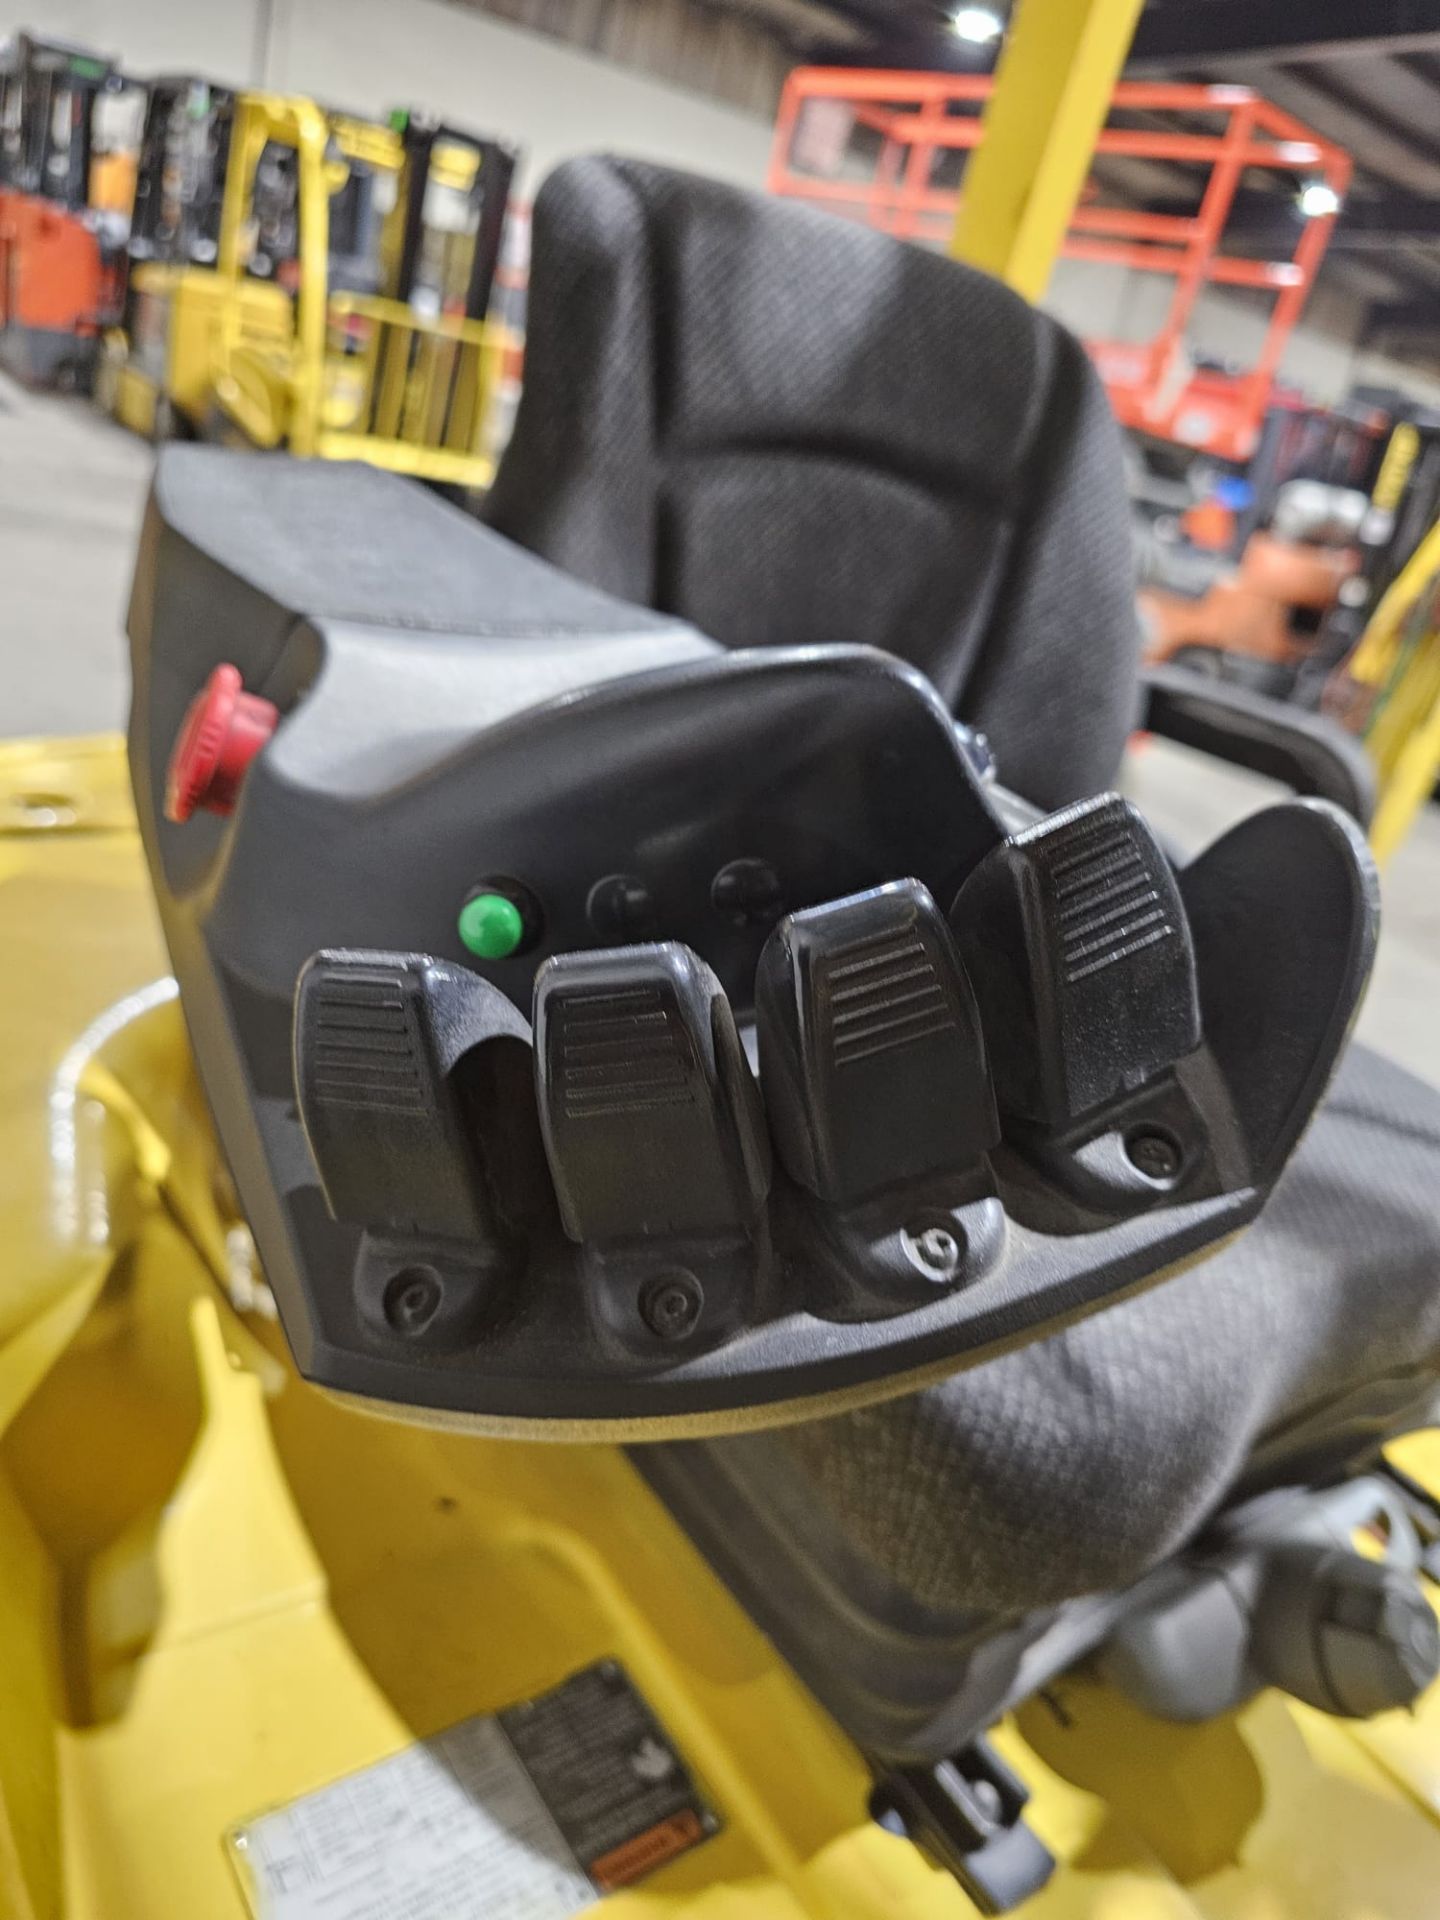 2014 Hyster 4,500lbs Capacity Forklift Electric 48V with sideshift & 4 functions & 3-STAGE MAST 189" - Image 3 of 6